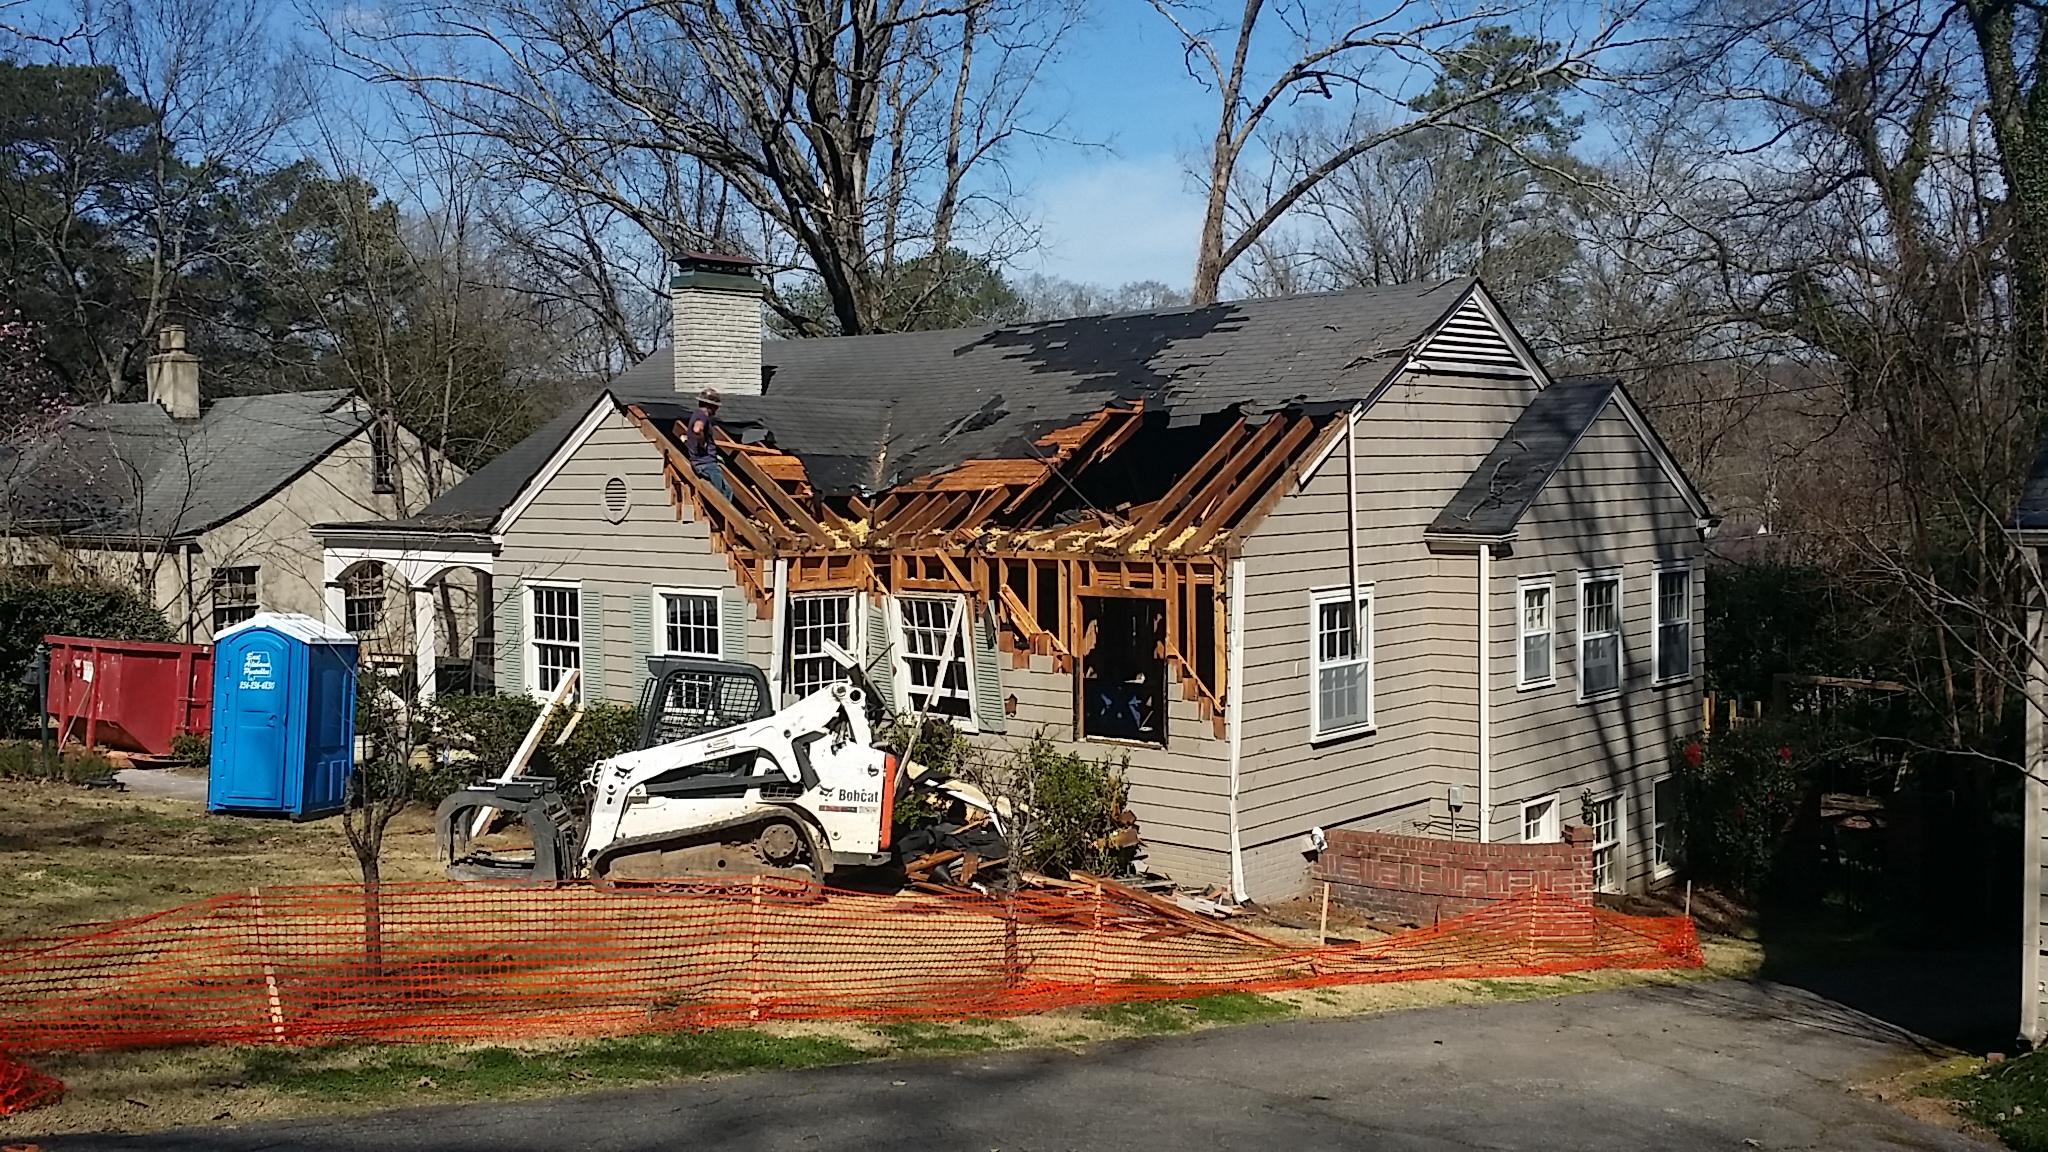 THIS OLD HOUSE WILL BE REBUILD INTO A TWO STORY HOUSE